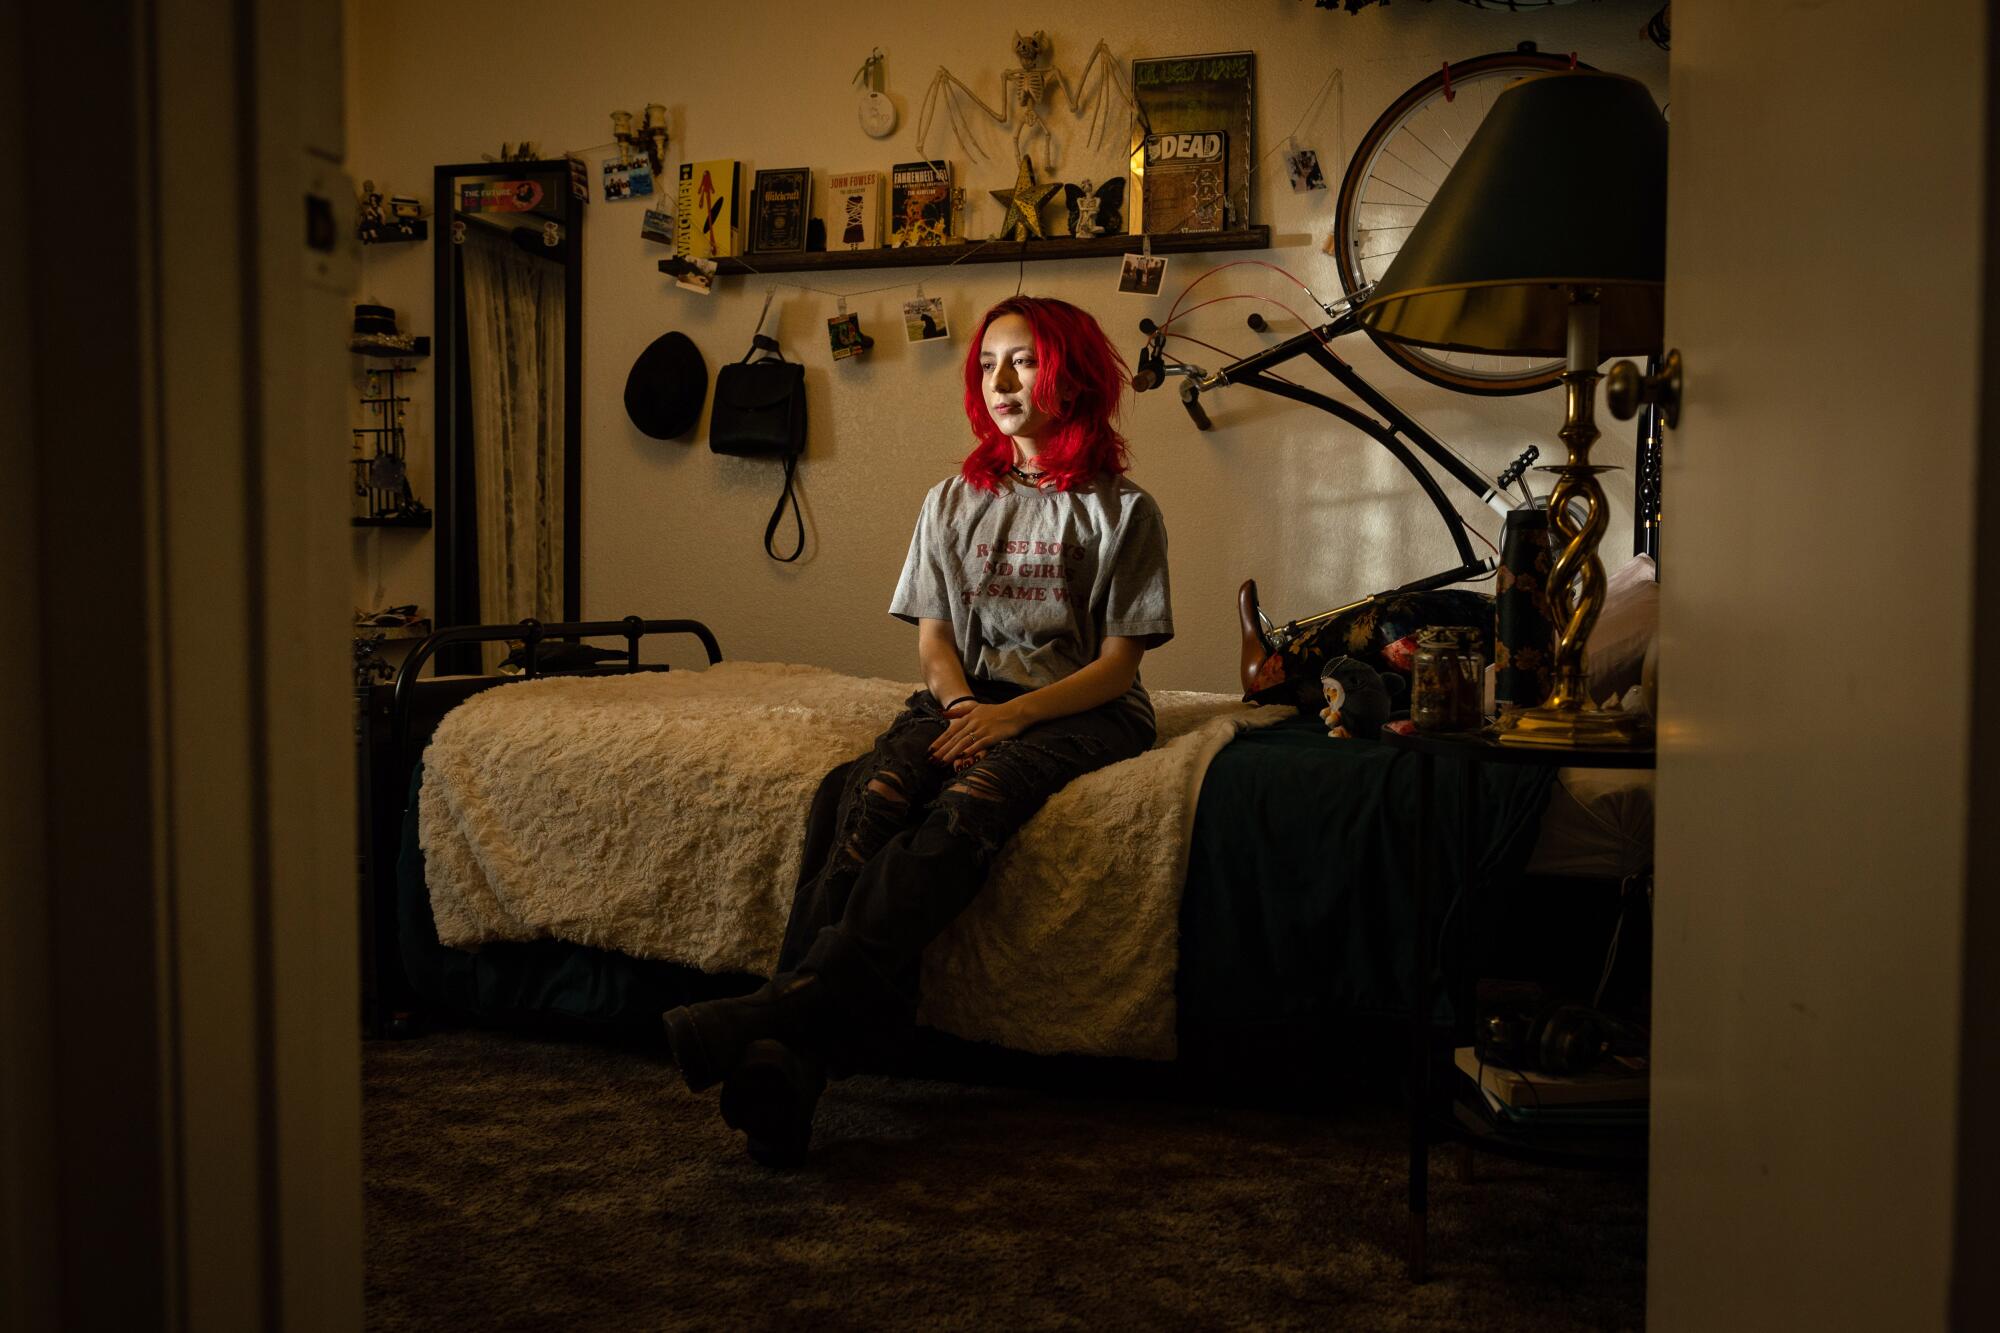 Milo Easley, a 16-year-old trans high school student, poses for a portrait in his bedroom